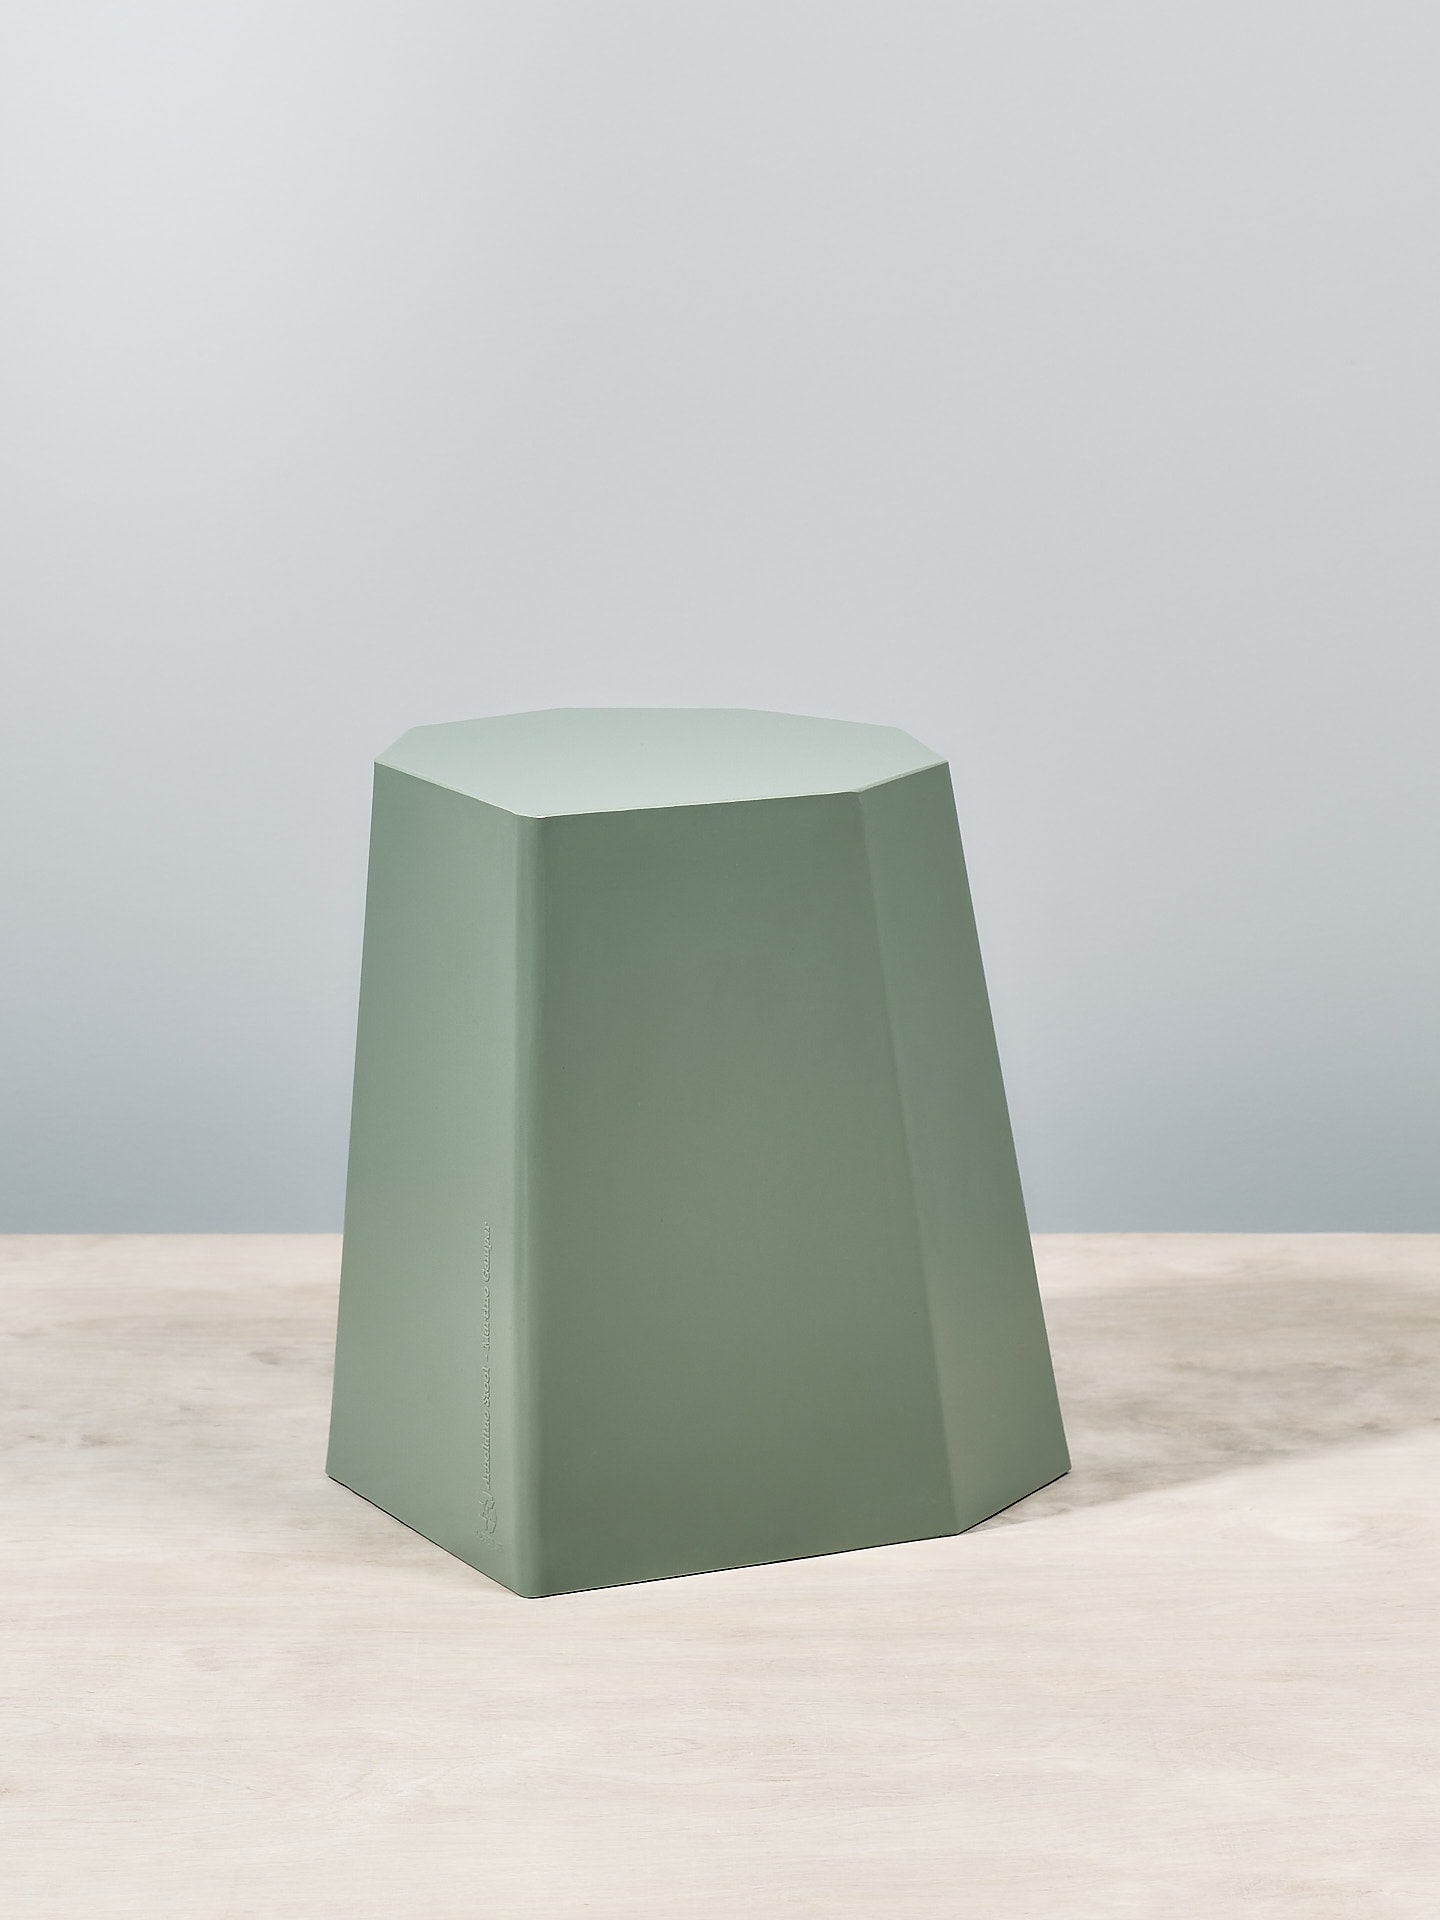 An Arnoldino Stool – Sage by Martino Gamper sitting on top of a table.